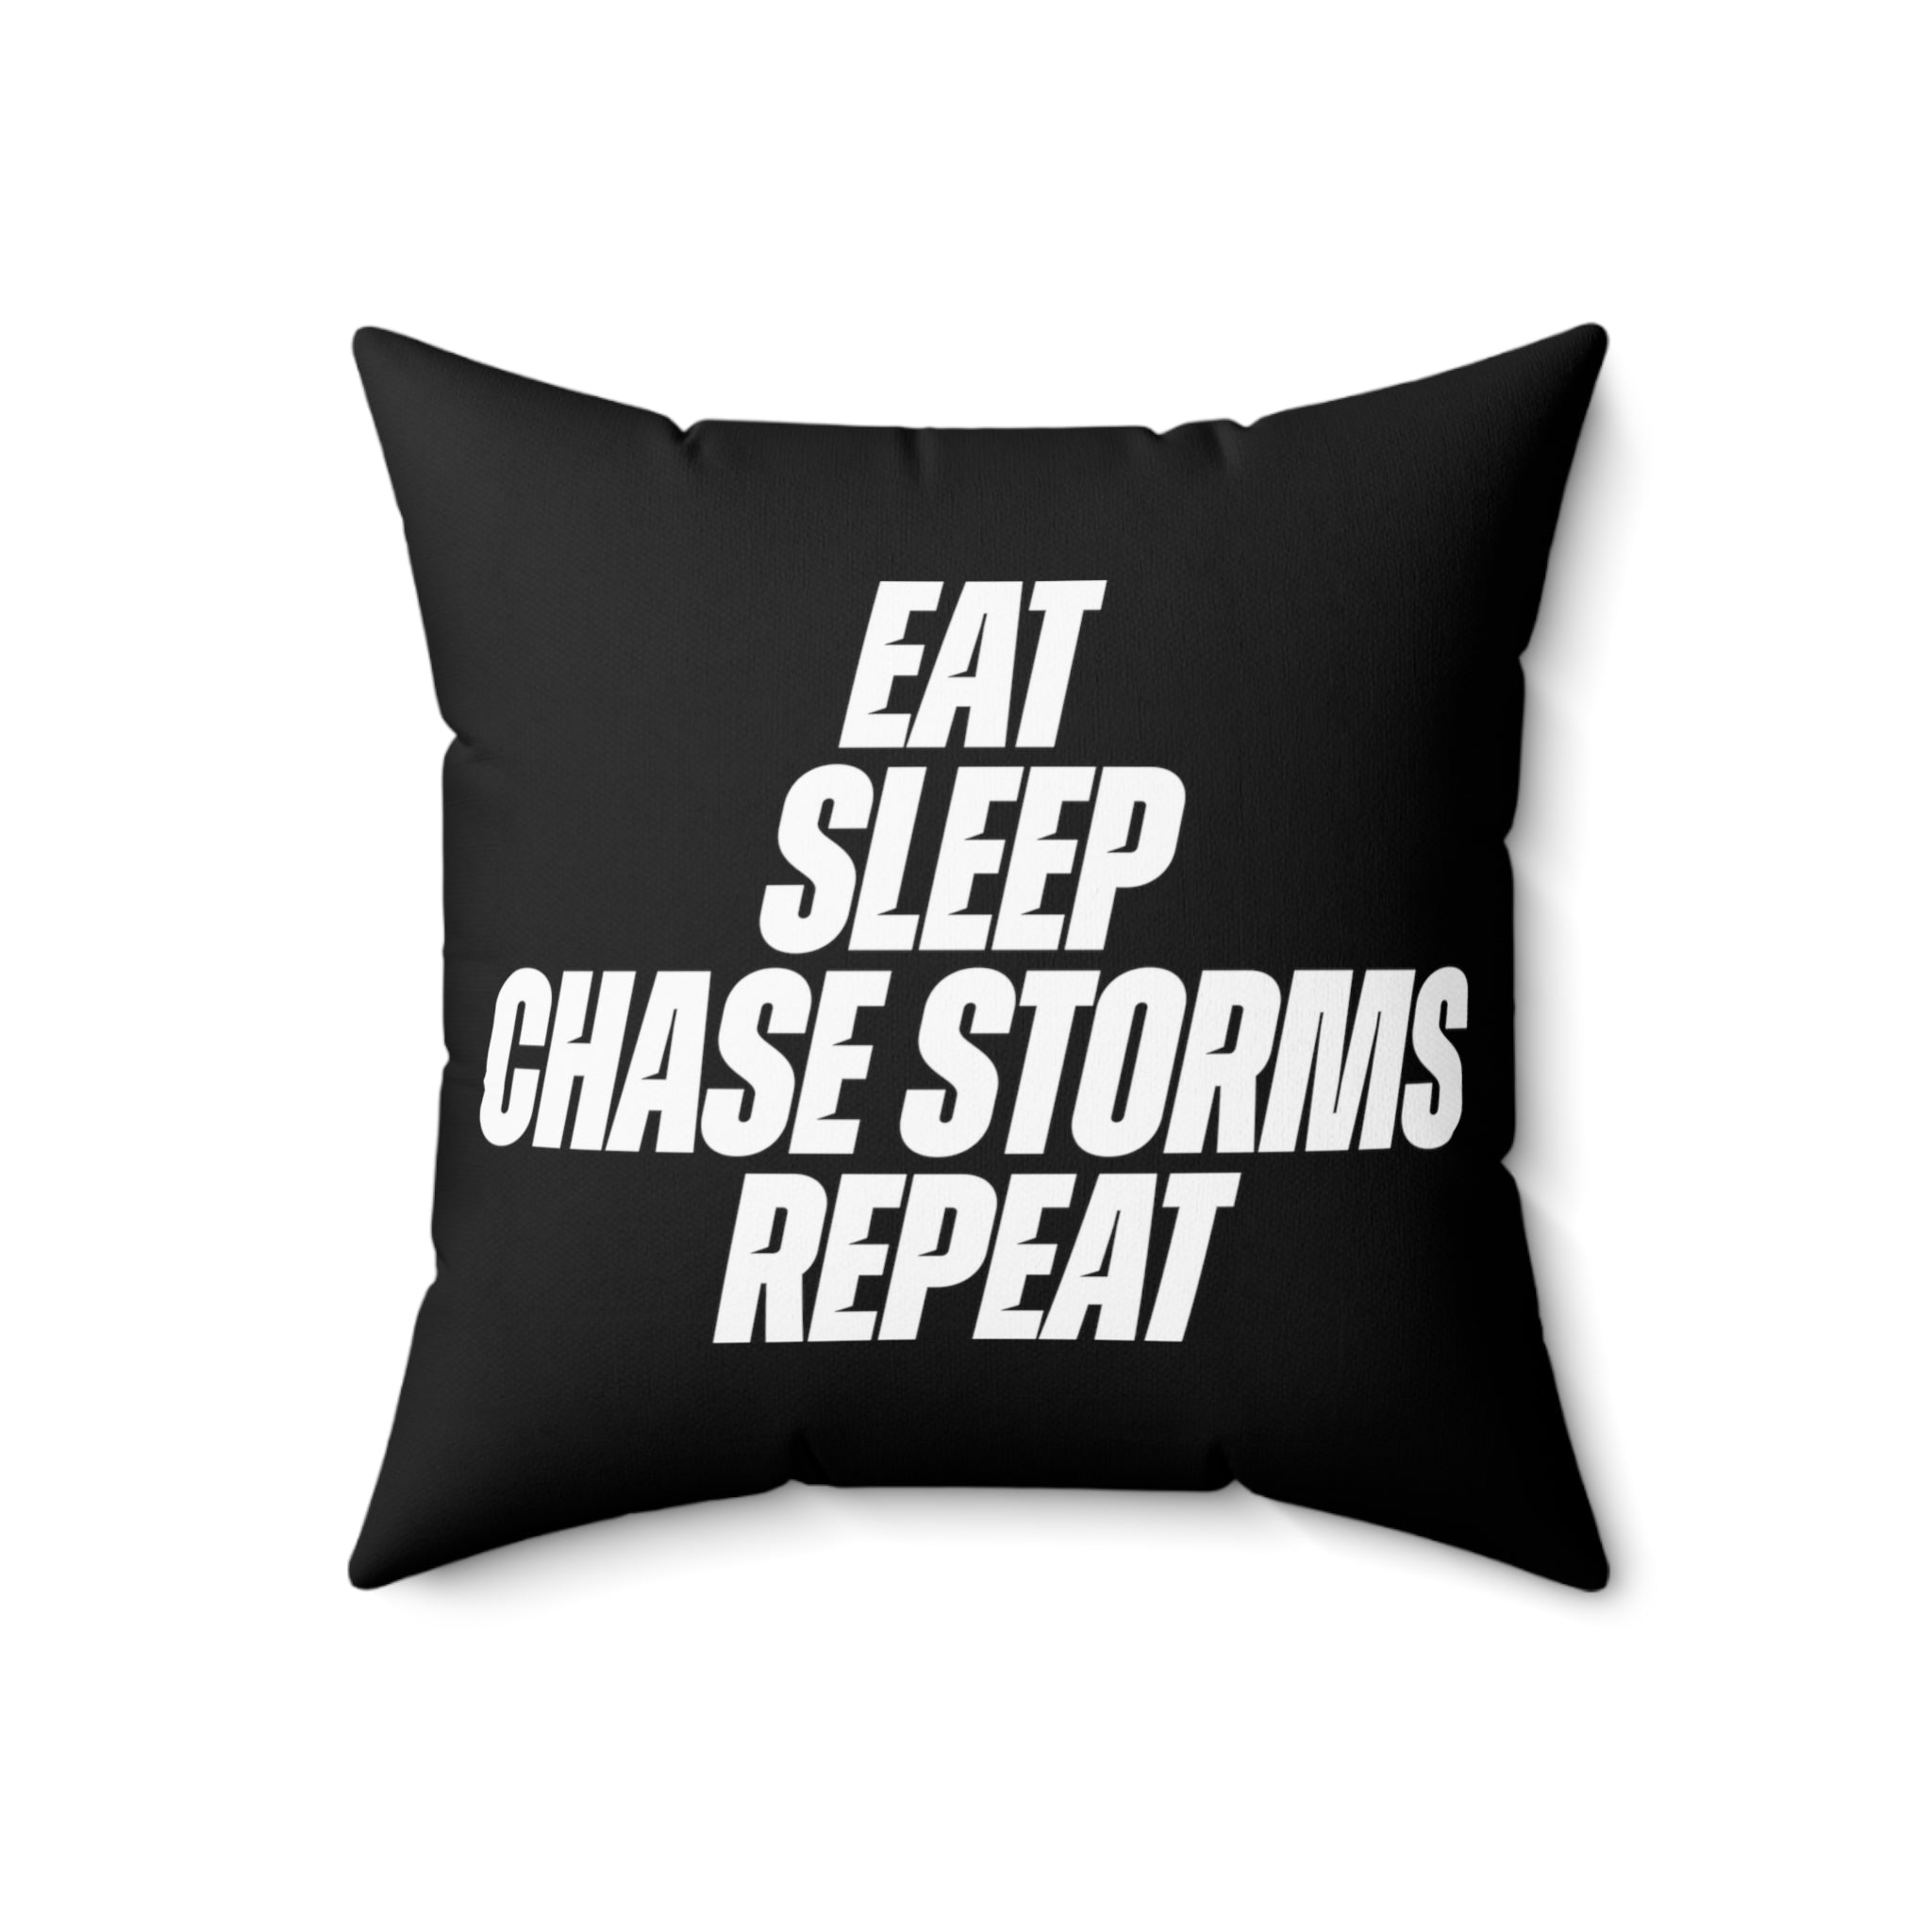 Eat, Sleep, Chase Storms, Repeat Throw Pillow 